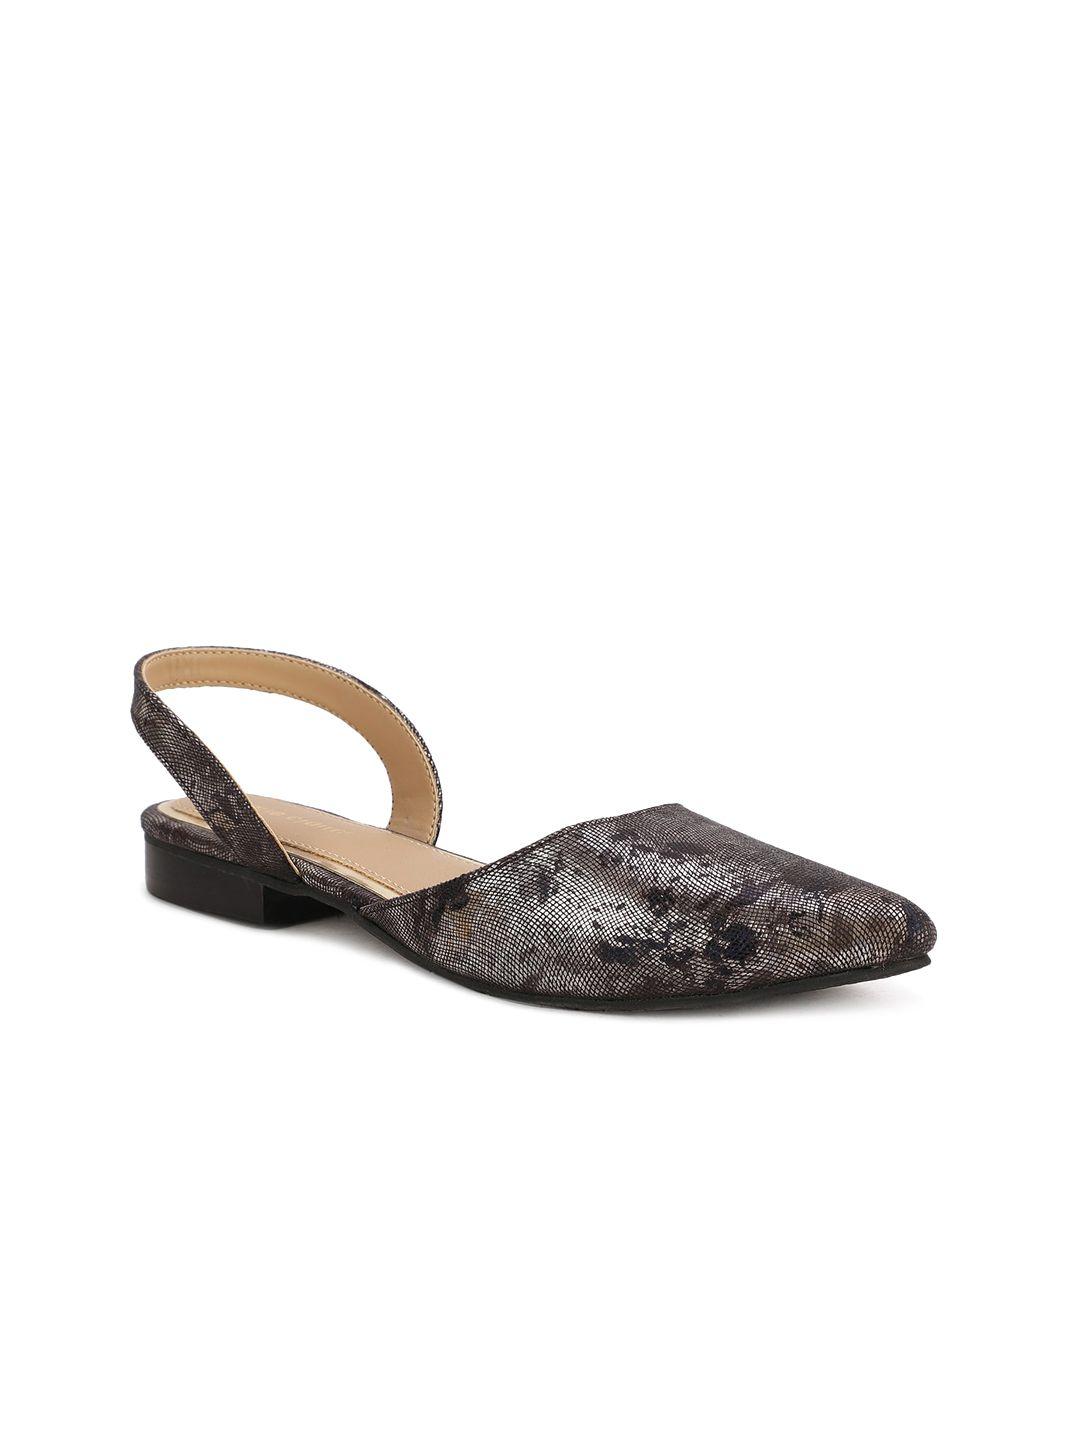 marie claire women black printed mules flats